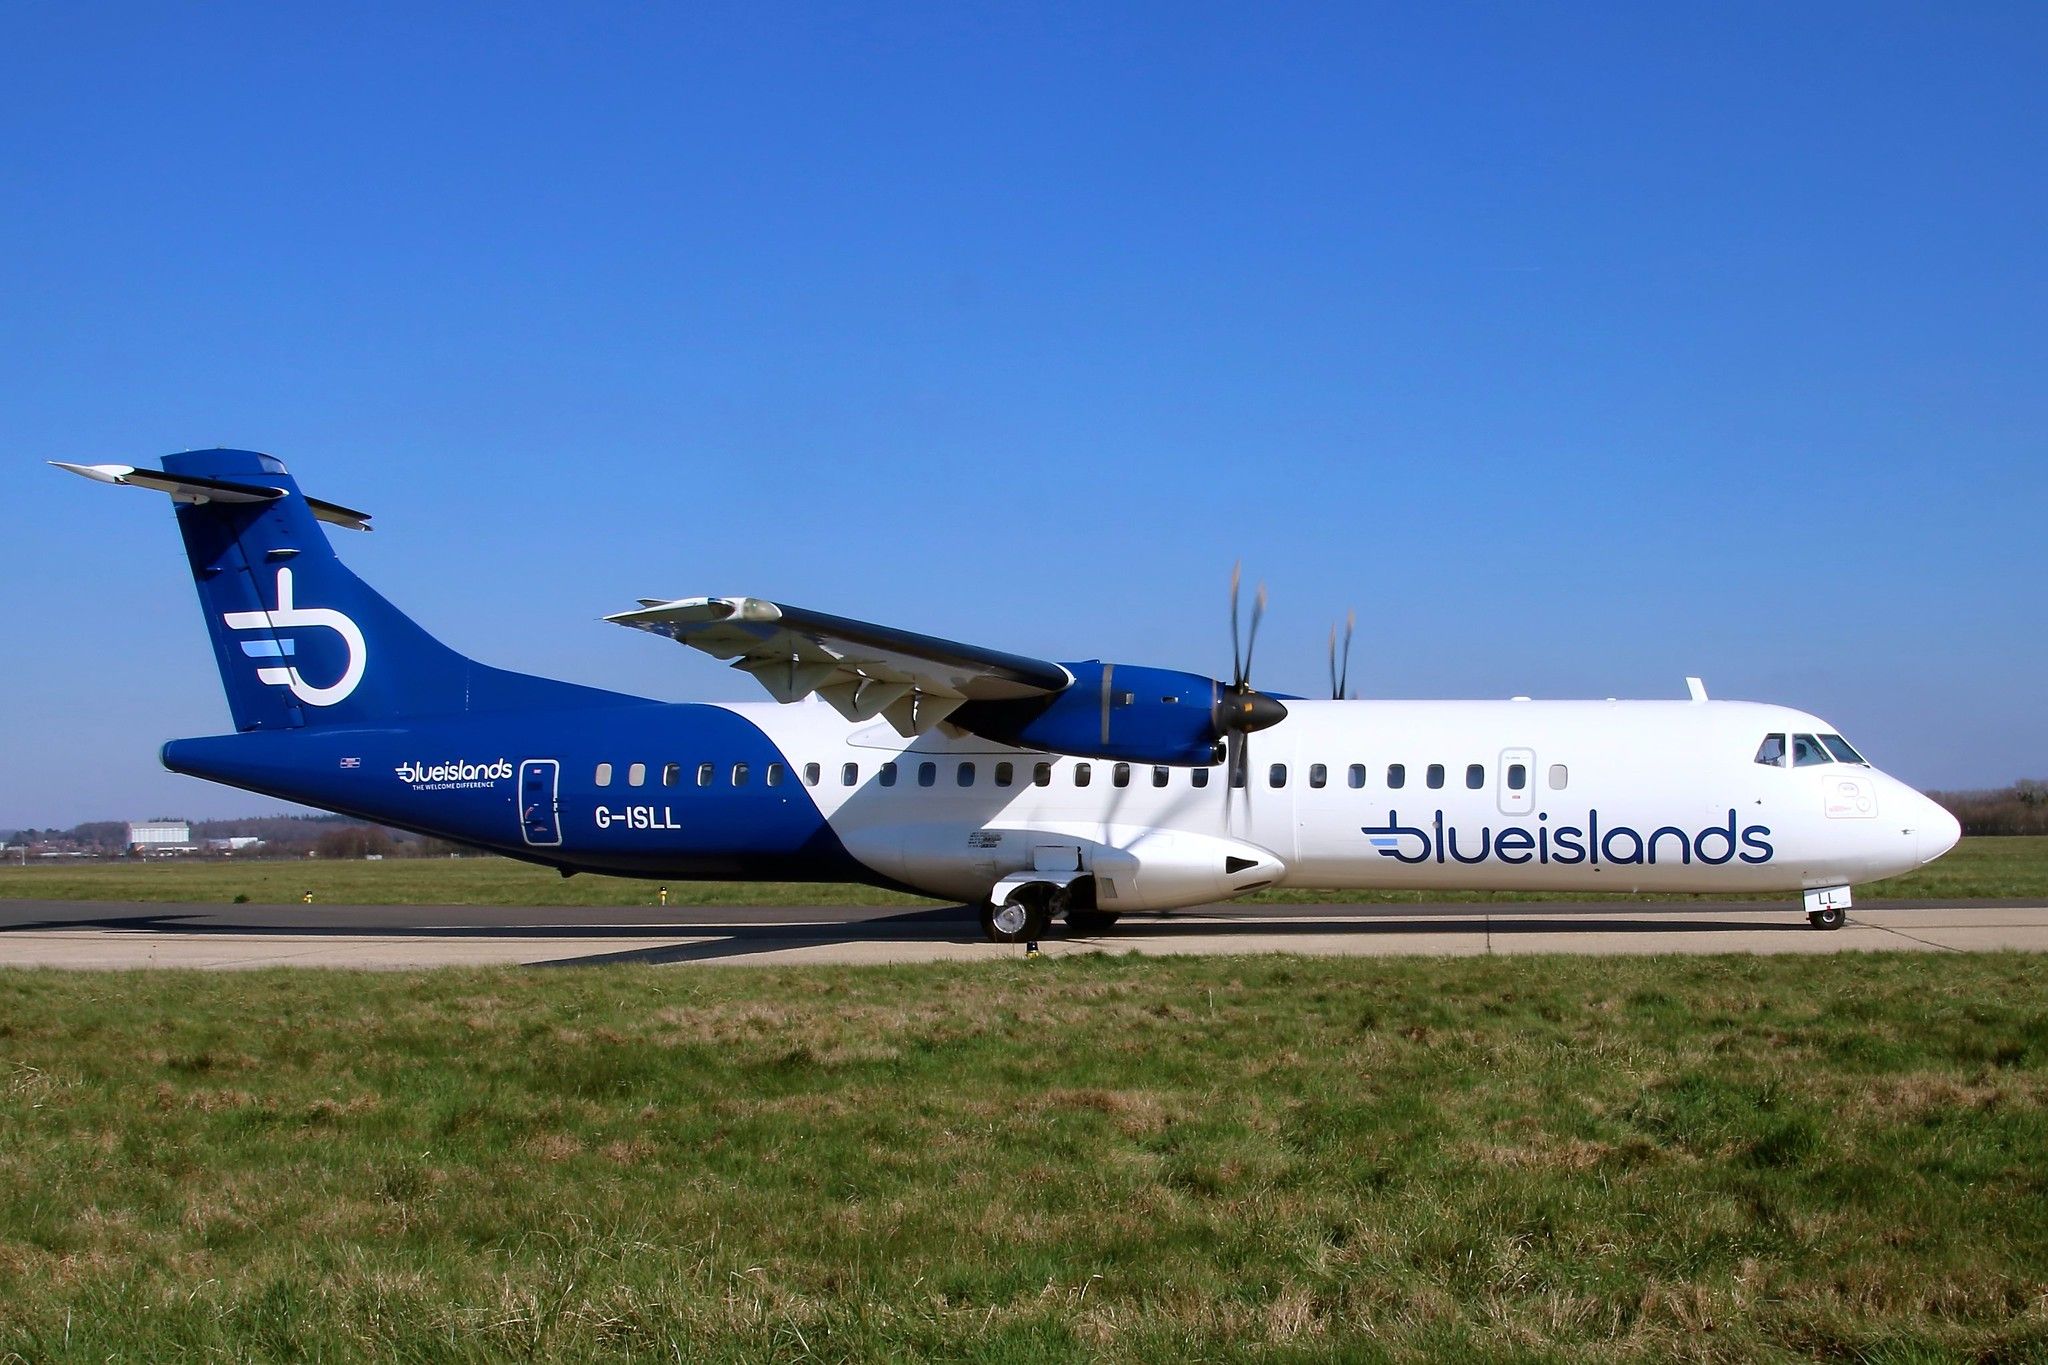 A Blue Islands ATR 72 on the taxiway.